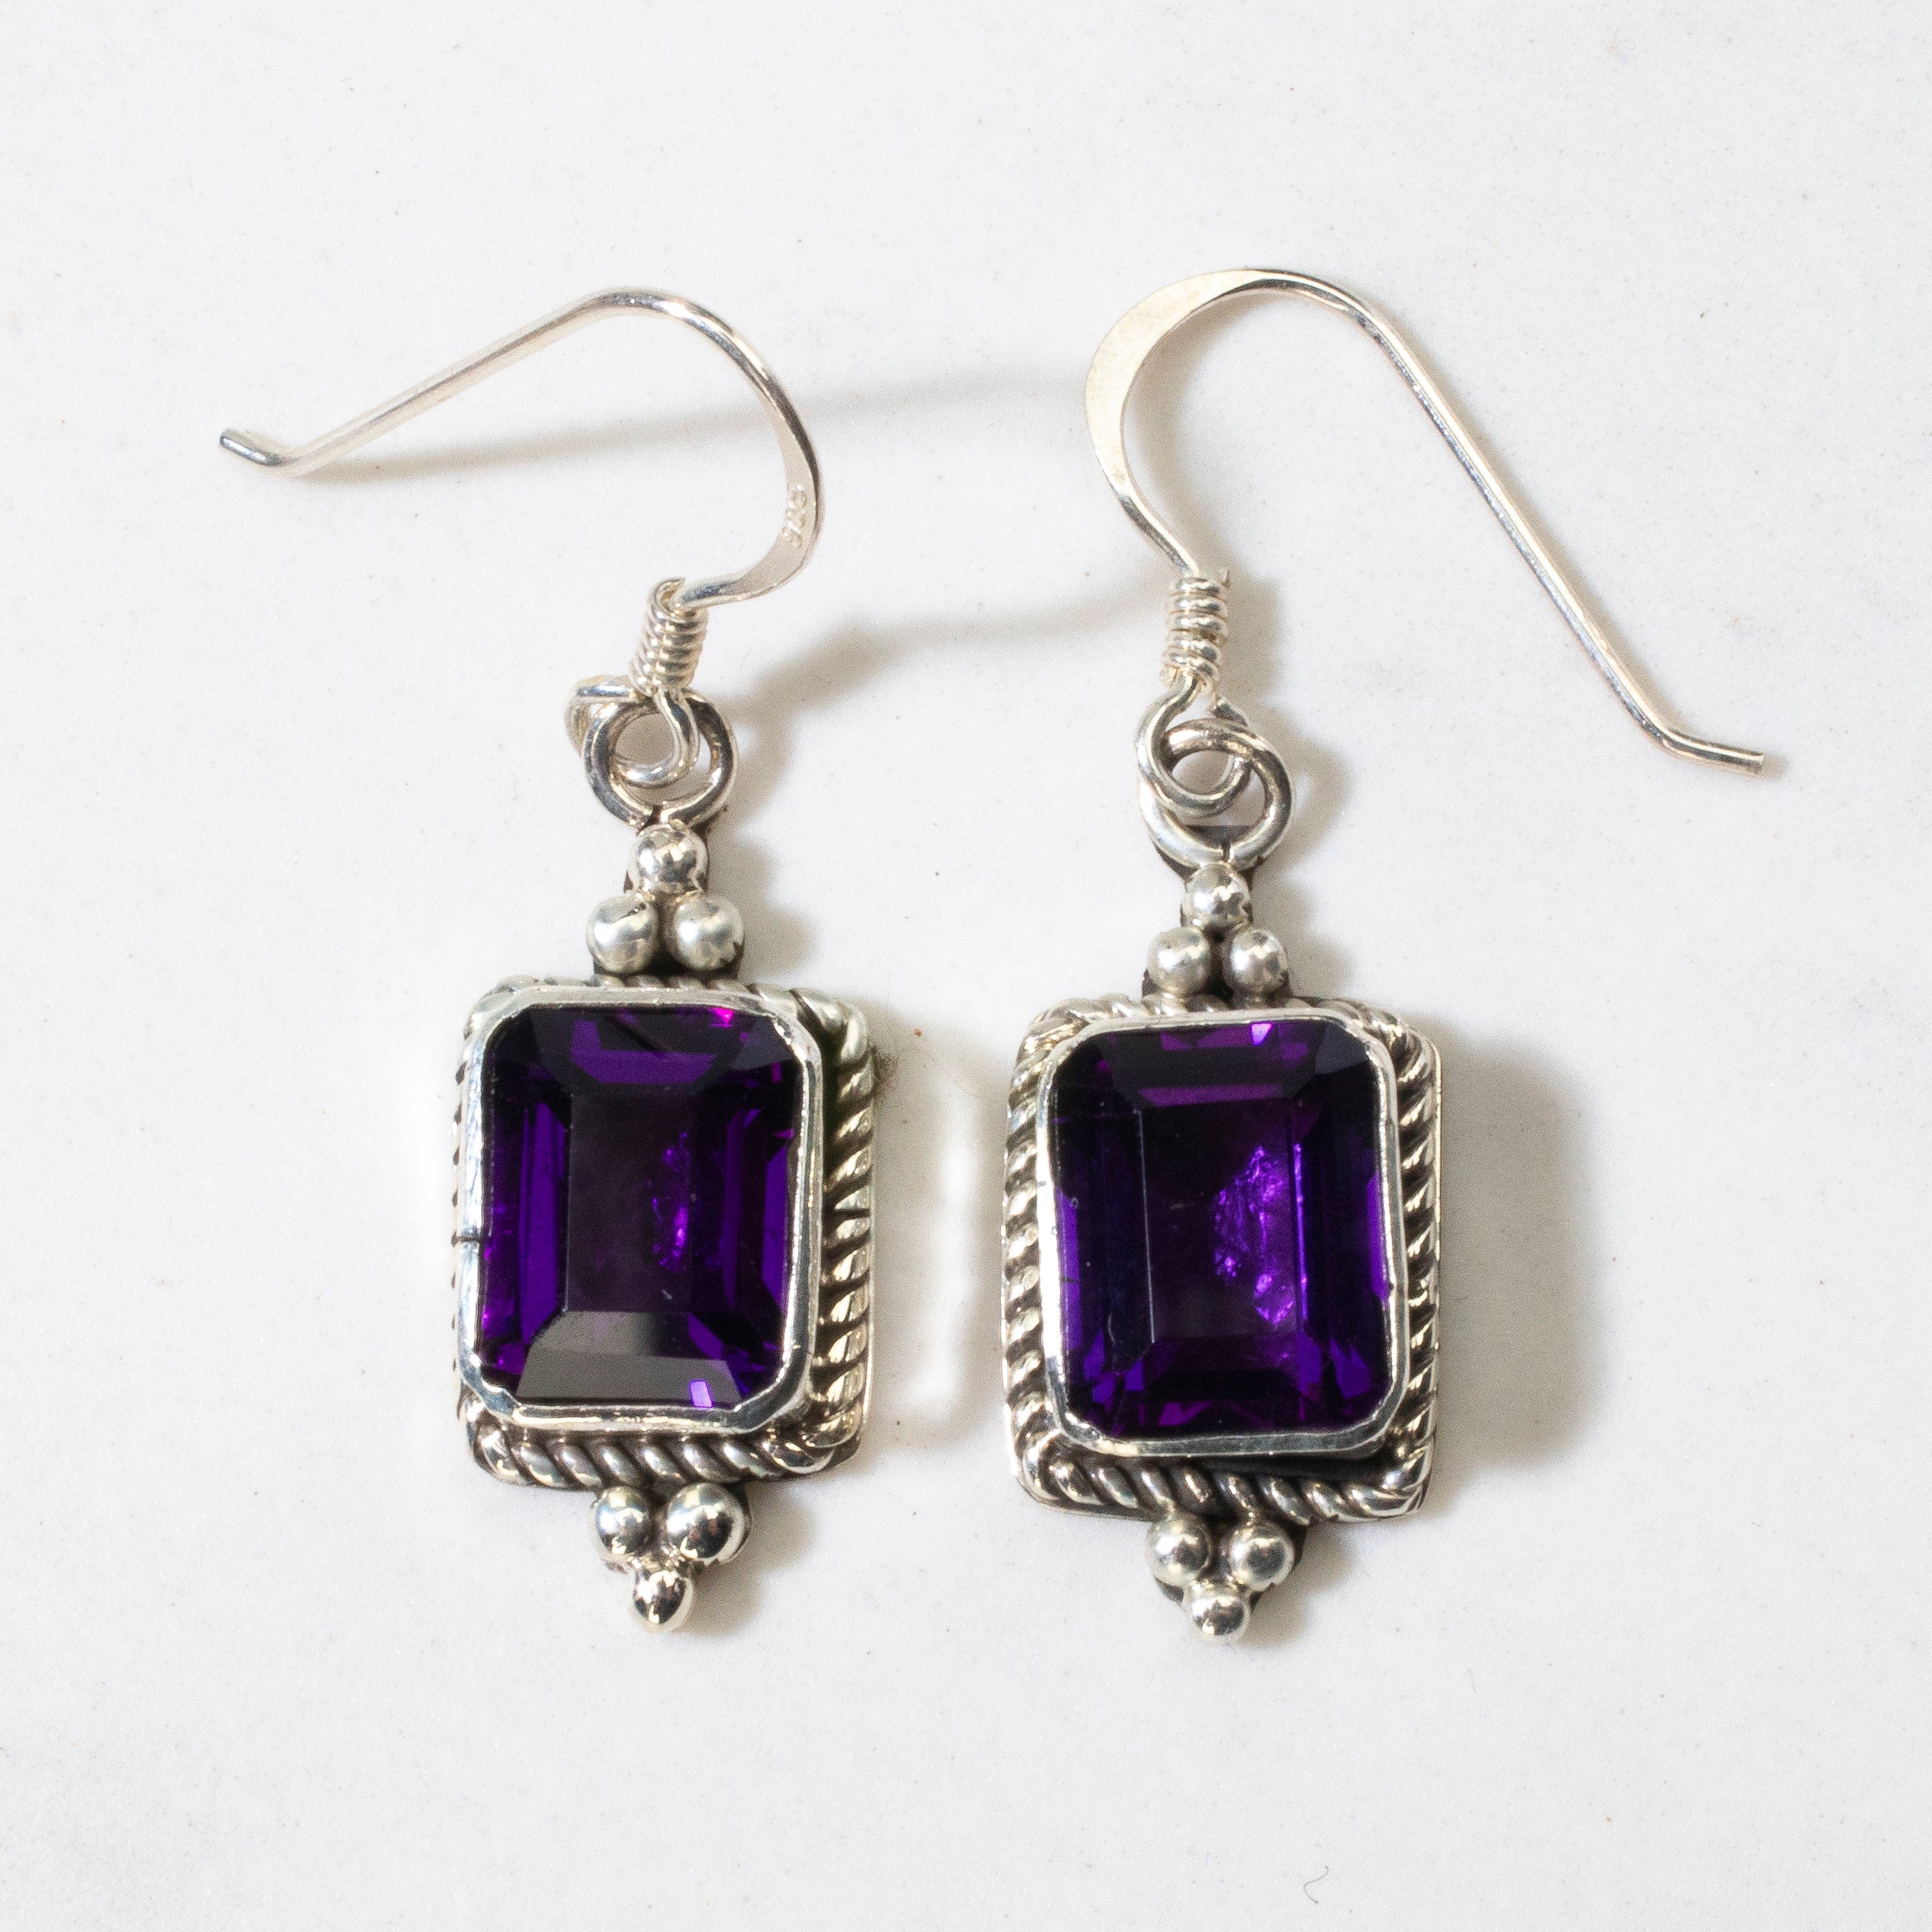 Kalifano Native American Jewelry D. Touchine Amethyst Square Navajo USA Native American Made 925 Sterling Silver Earrings with French Hook NAE600.021